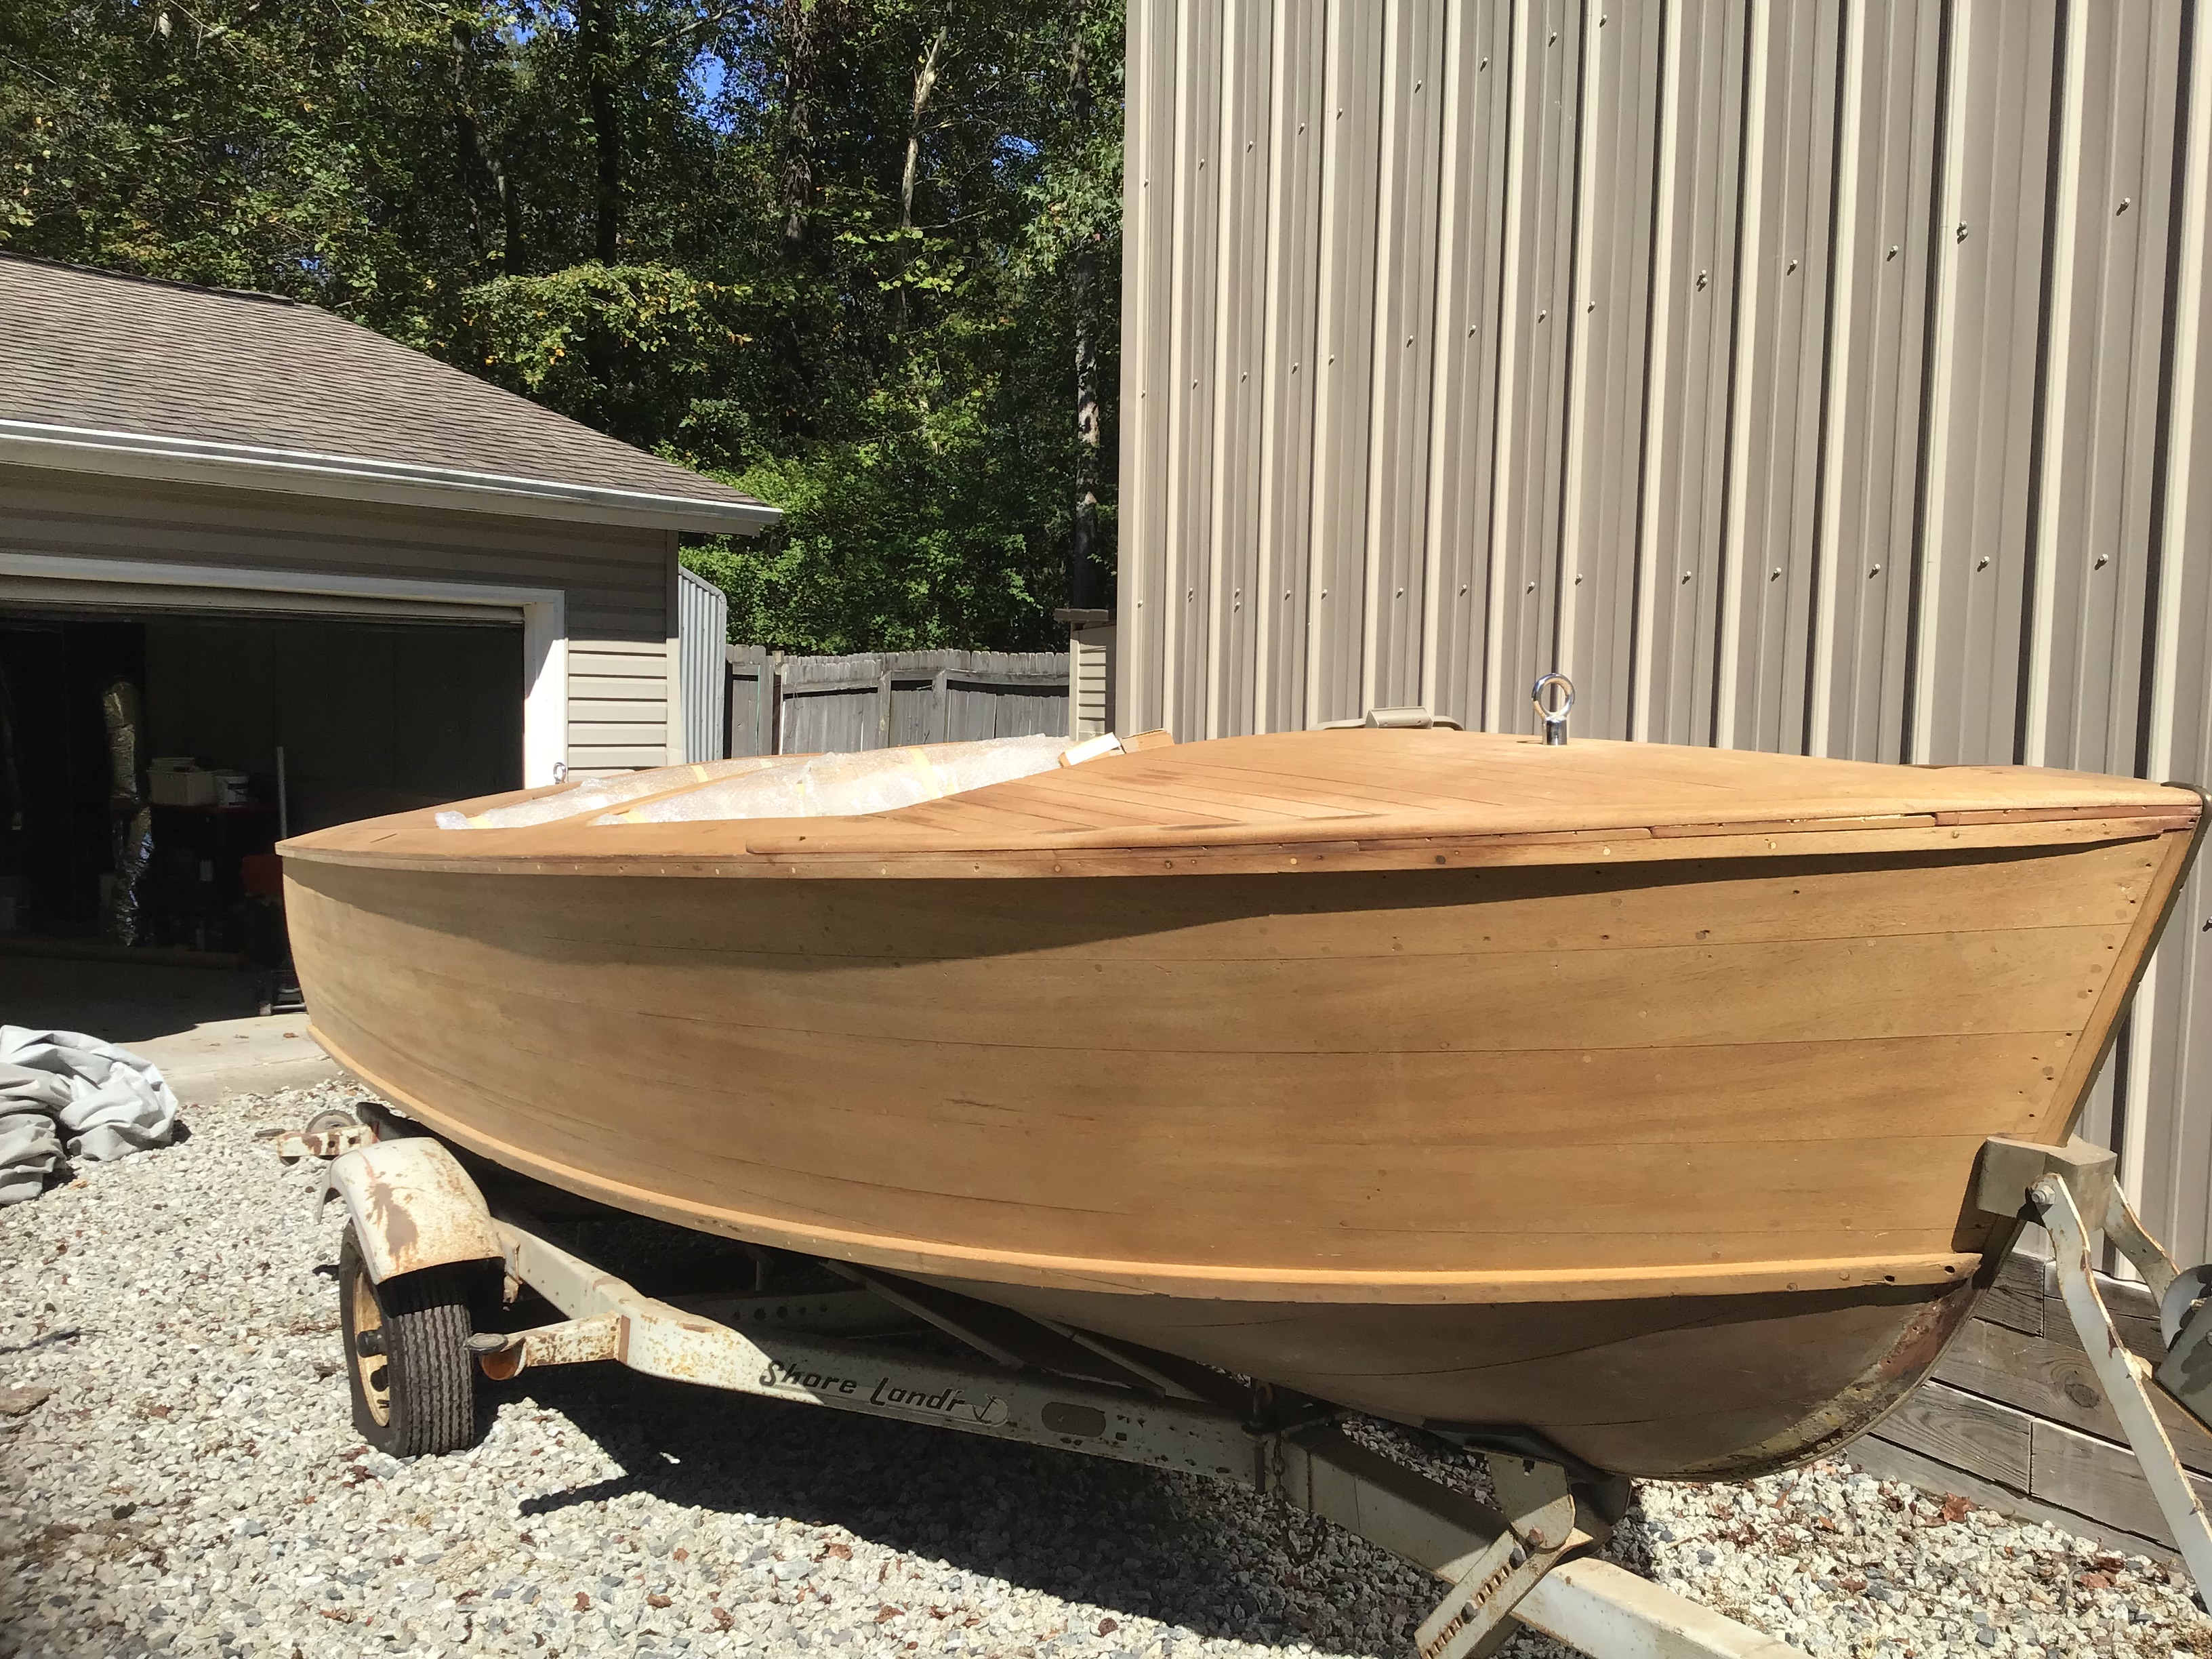 100 Year Old Wooden Fishing Boat Saved   #1 for classic  wooden boat stories, info, advice & news - updated daily